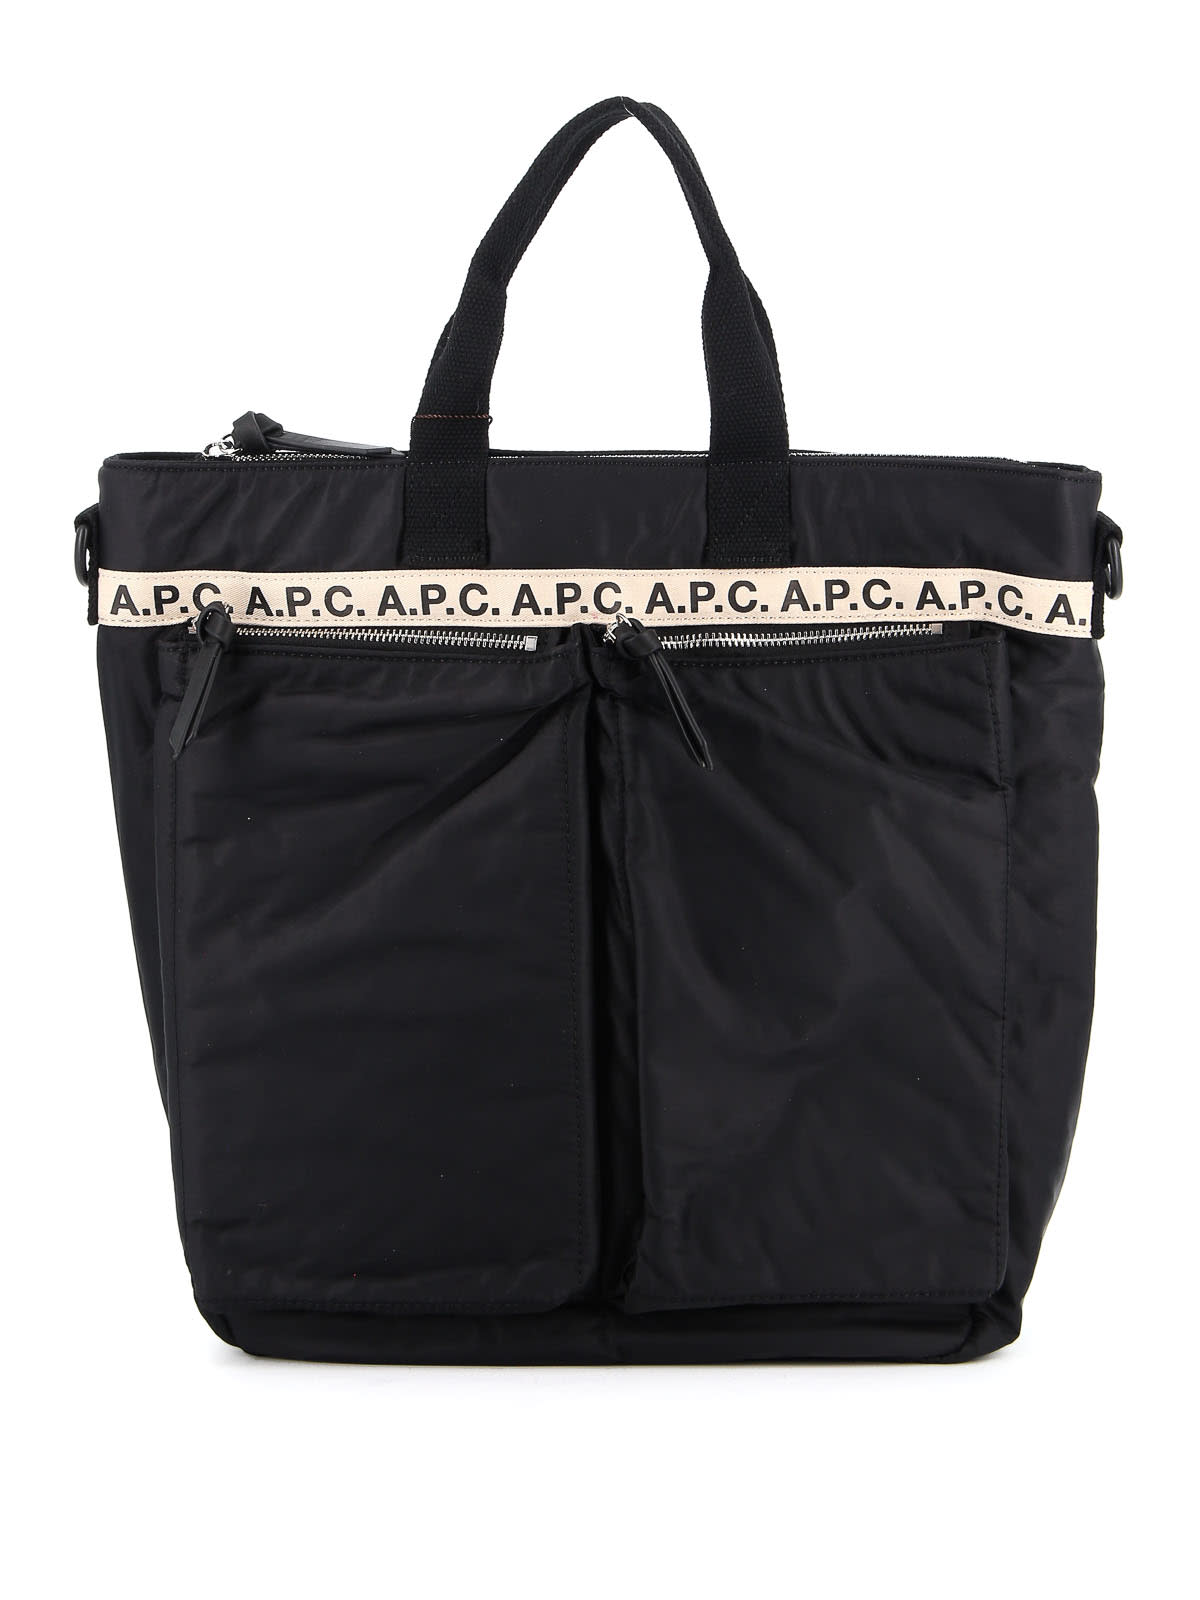 A.P.C. Shopping Repeat